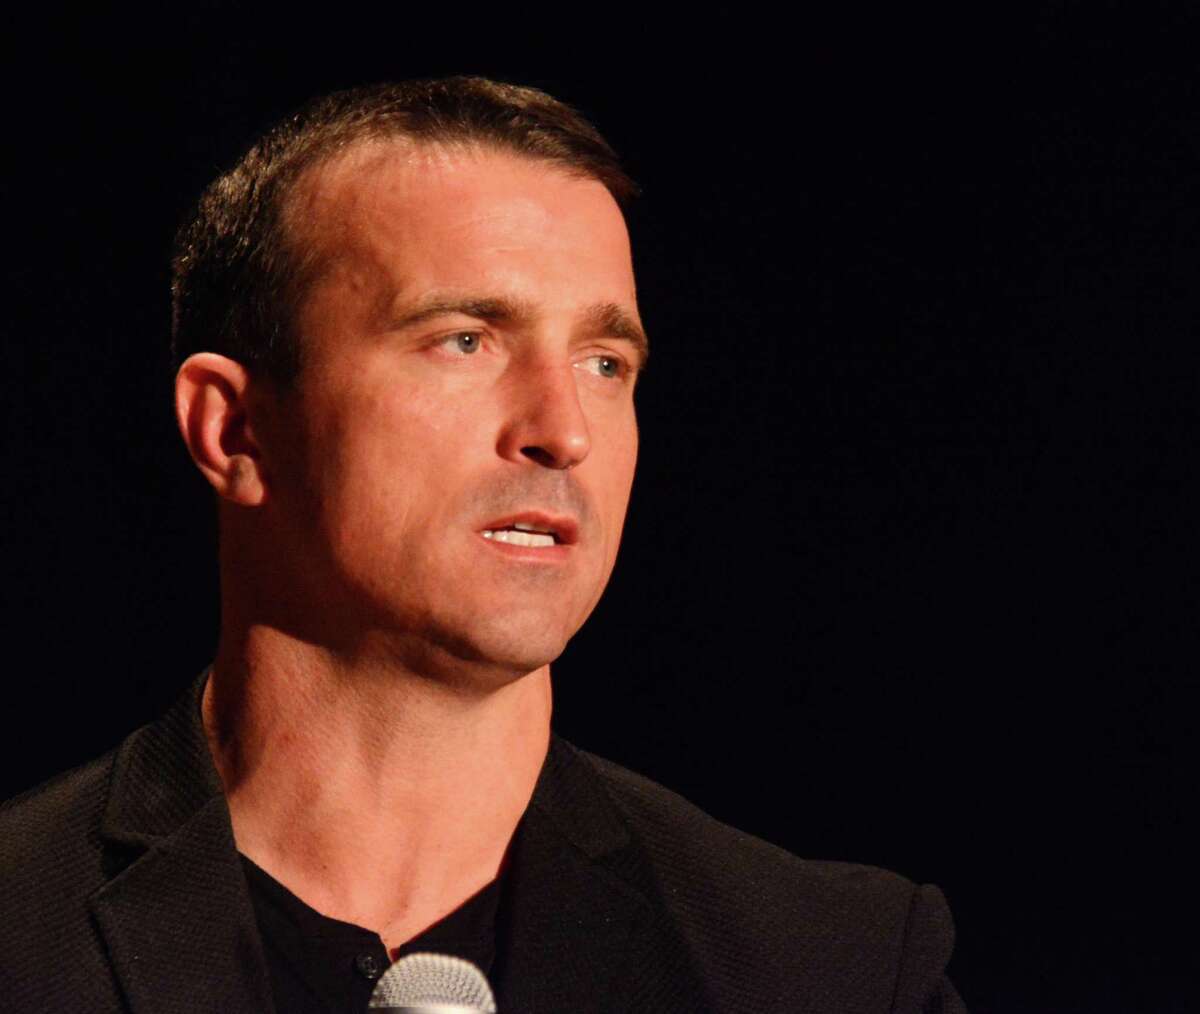 Chris Herren, a former NBA player, travels all over the country telling his story hoping to raise awareness of the danger of drugs and alcohol addiction. Herren ruined his career and almost lost his life and family due to his addictions. Herren gave his moving testimony at Danbury High School in Wednesday night April 6, 2016.